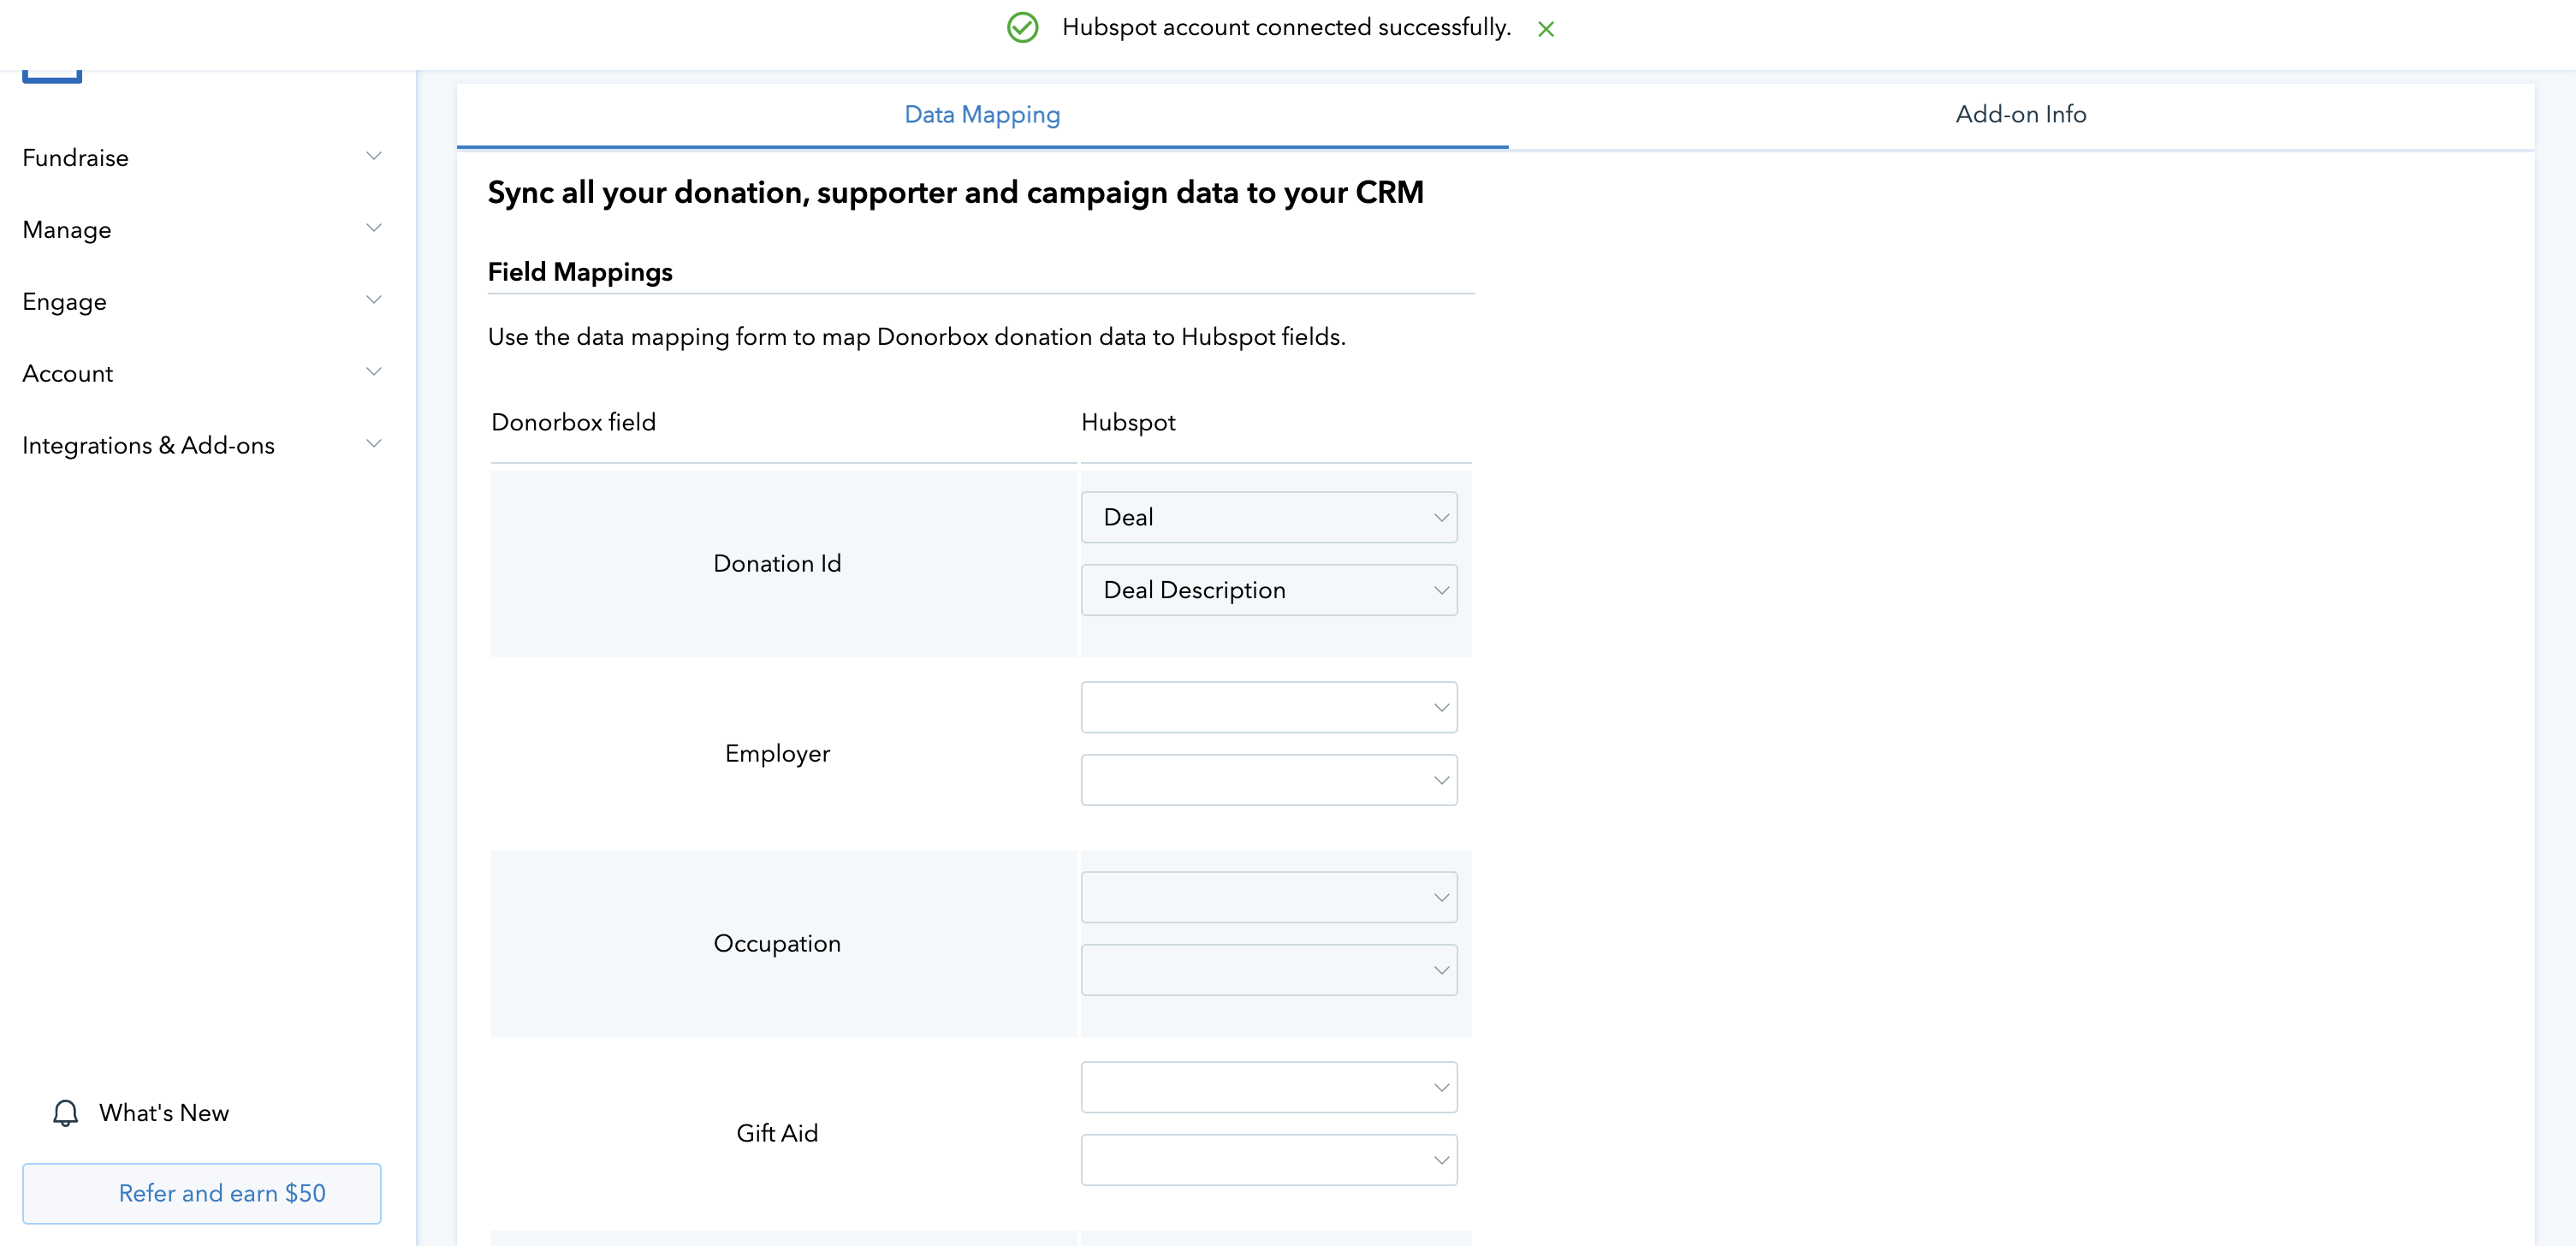 Screenshot of the HubSpot add-on page on the Donorbox dashboard, showing various customization options that are available after the add-on is activated and the integration is completed. 